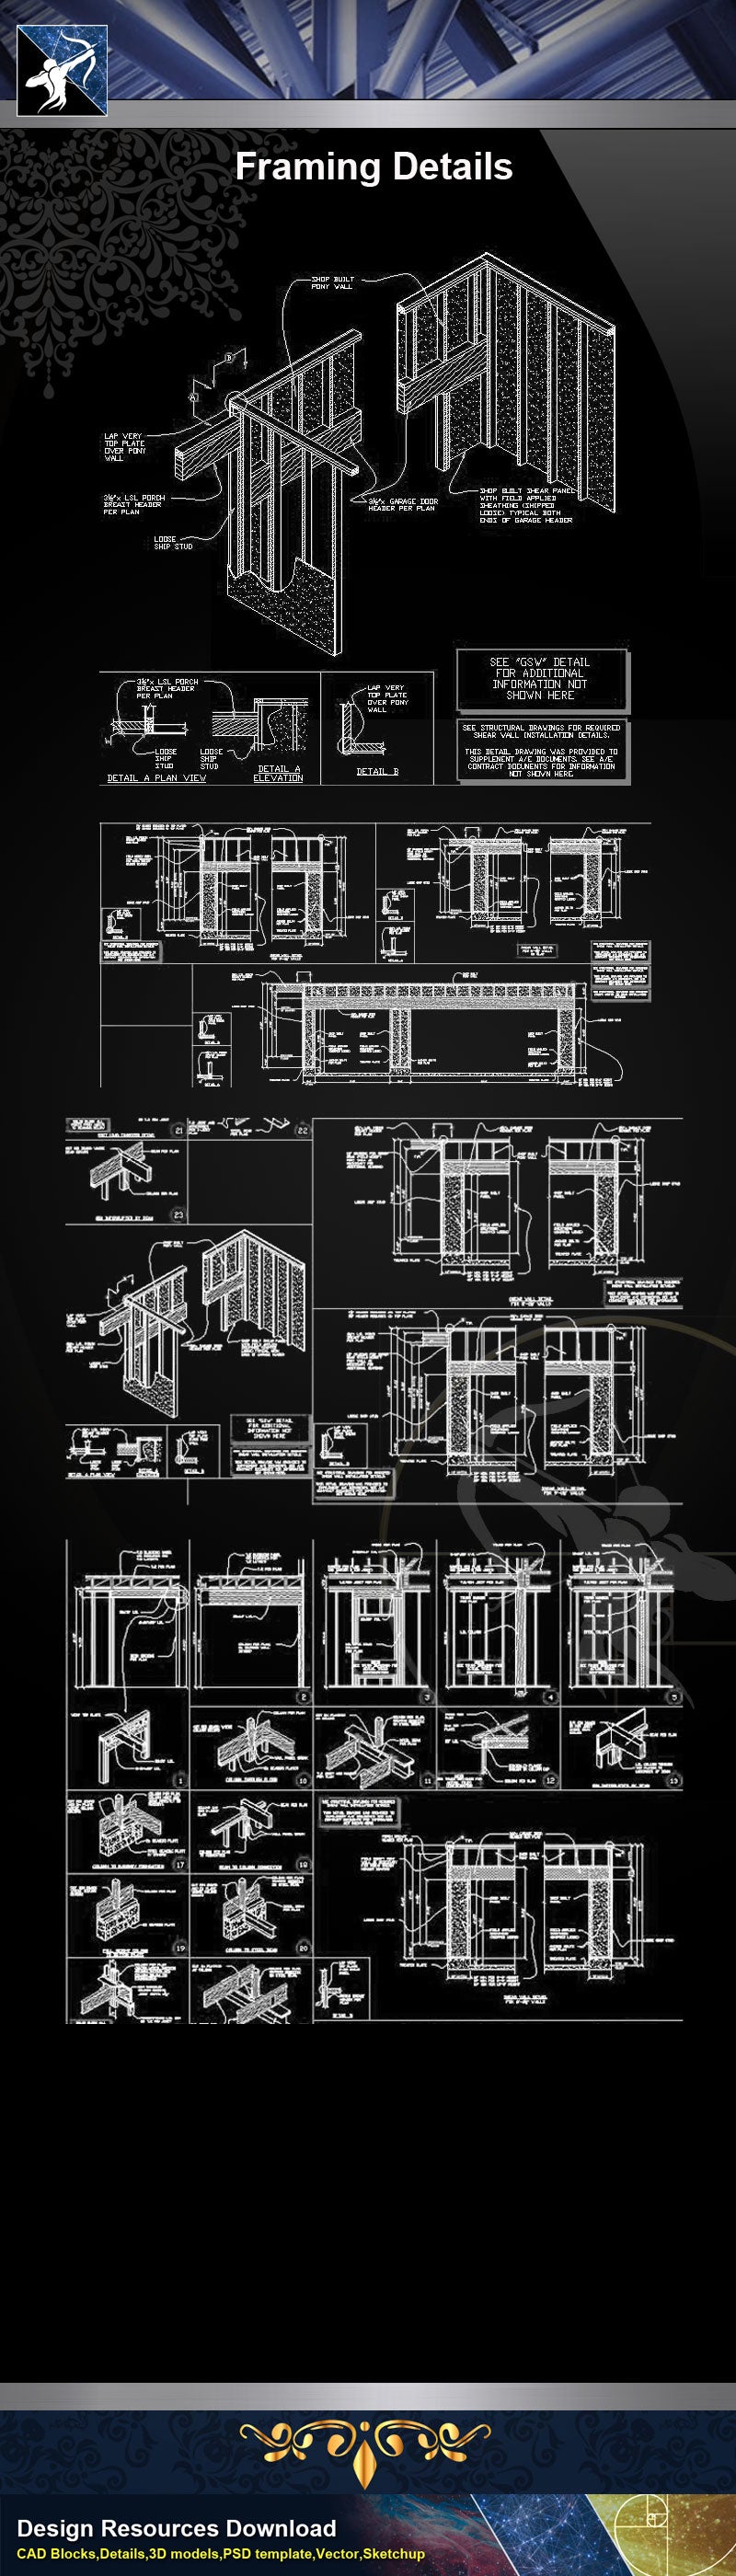 Curtain Wall Details,Framing Details,Architecture CAD Details, CAD Details,plan,elevation,Interior Design,Architecture Details,CAD Details,Construction Details and Drawings